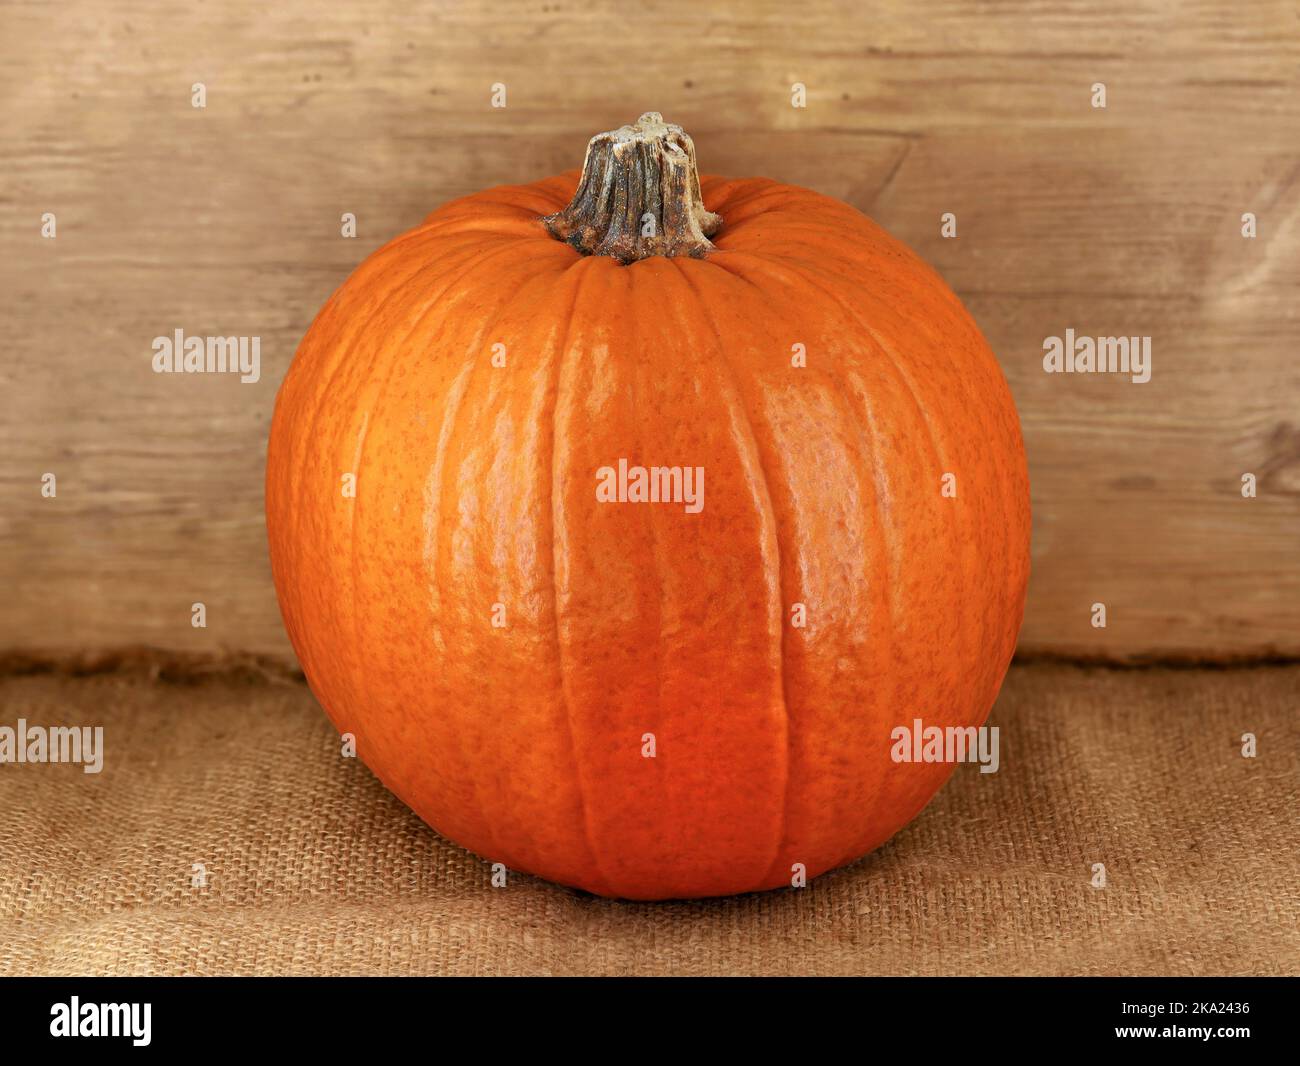 whole round pumpkin on jute sack with rustic wooden background, the perfect pumpkin to carve for spooky halloween faces Stock Photo